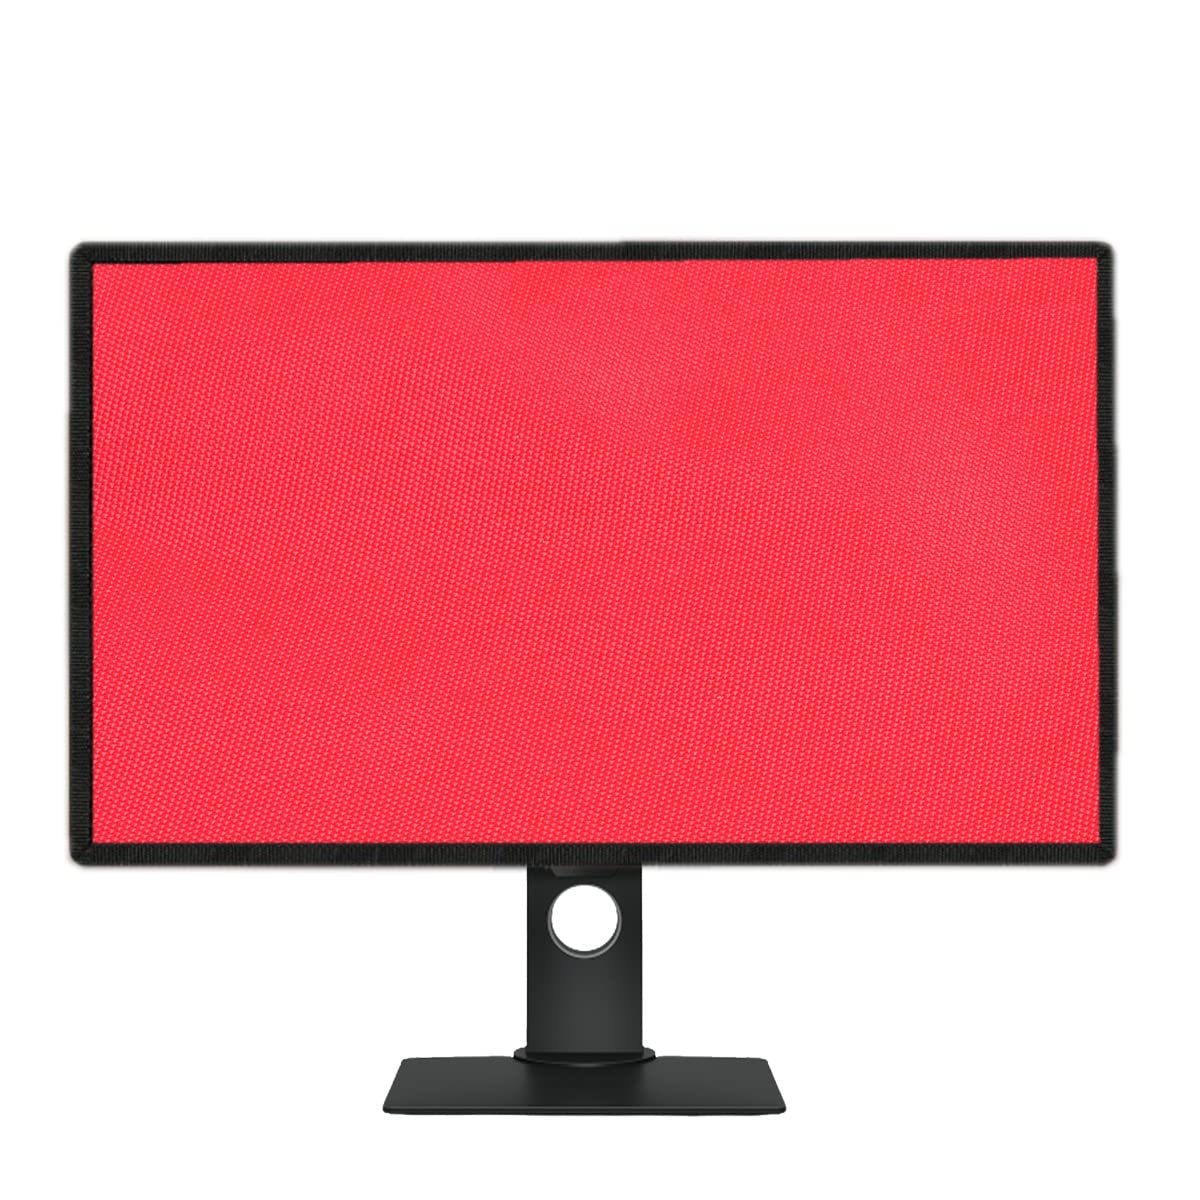 PalaP Super Premium Dust Proof Monitor Cover for BENQ 27 inches Monitor (RED)